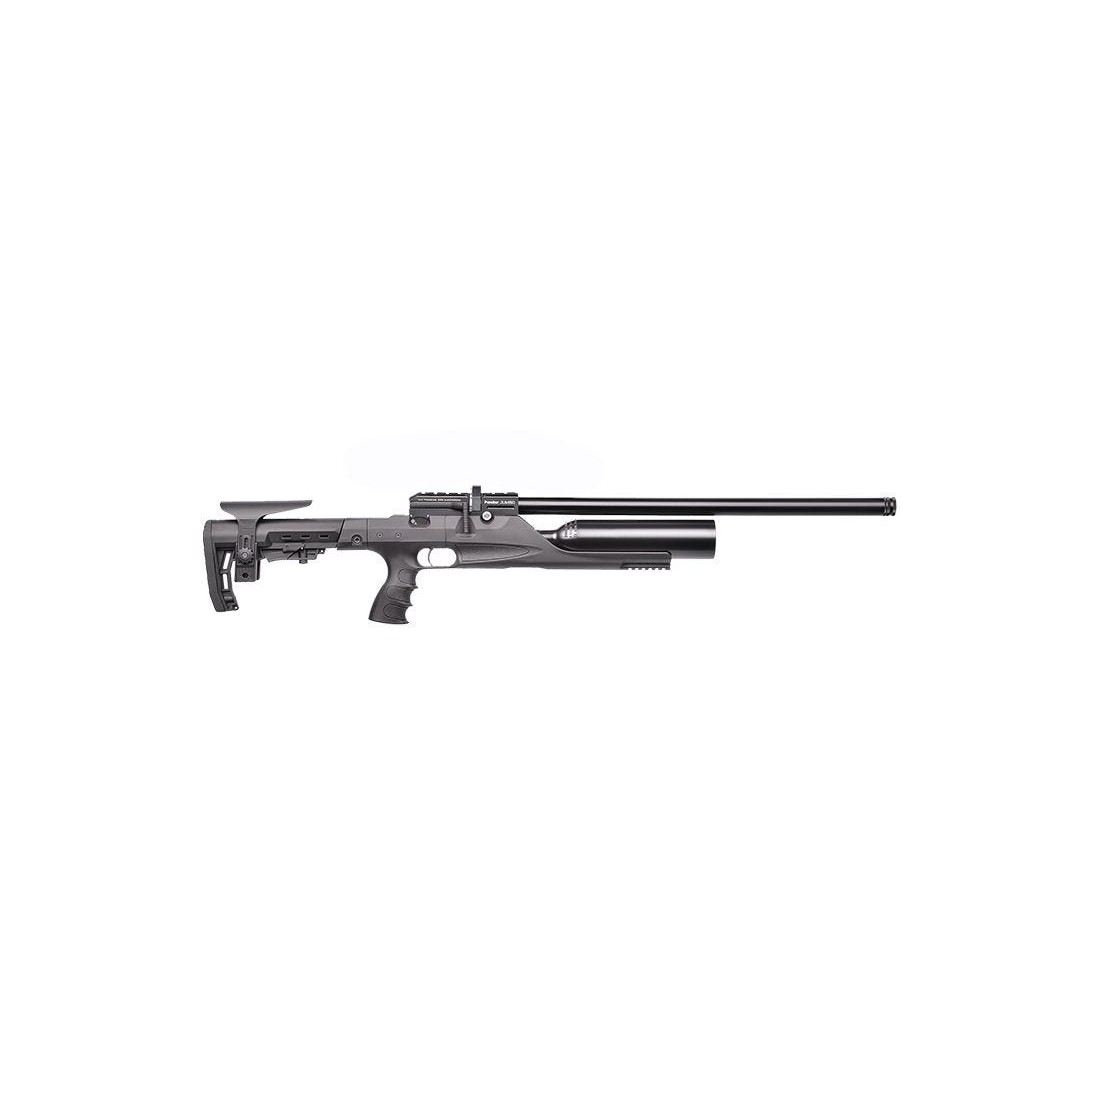 Carabina PCP Kral Puncher S Cal. 6.35mm